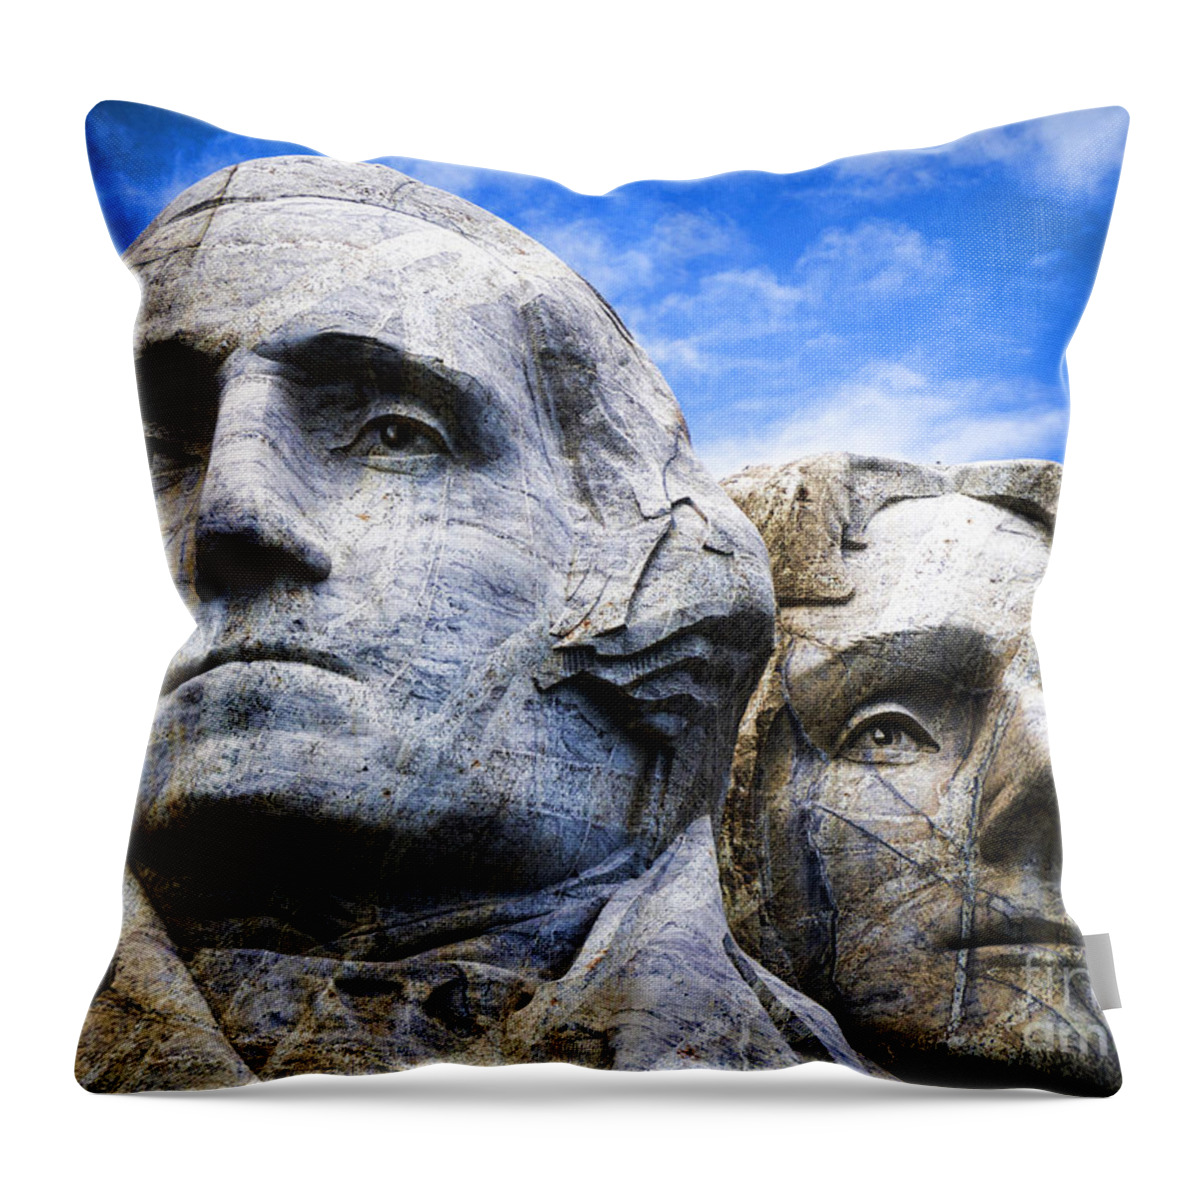 Mount Throw Pillow featuring the photograph Mount Rushmore #1 by Brenda Kean